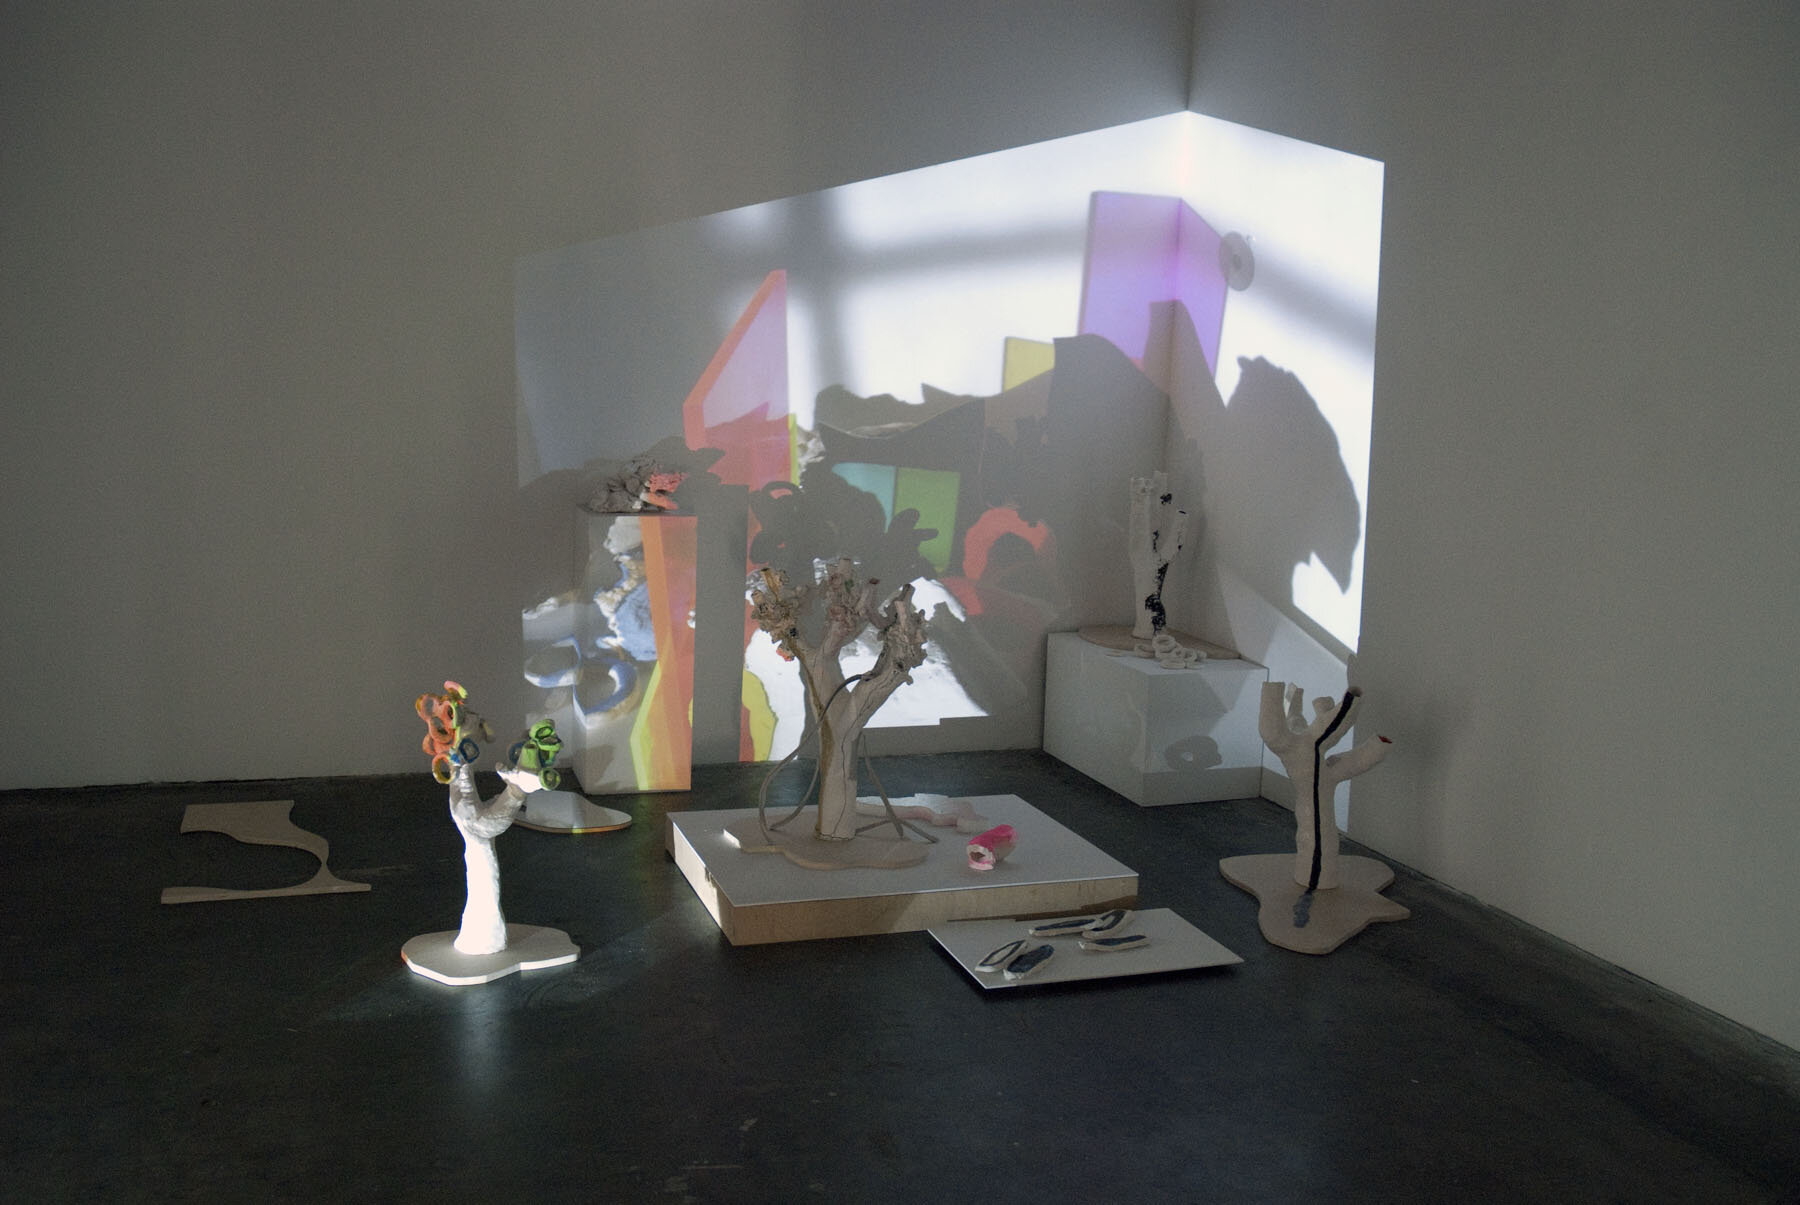   Everything is Everything , installation view, 2010, 30-minute projected digital movie loop, glazed and unglazed ceramic, spray paint, acrylic, archival pigment print on paper, plywood, mirrored plexiglas, latex, 122 x 241 x 192 inches 